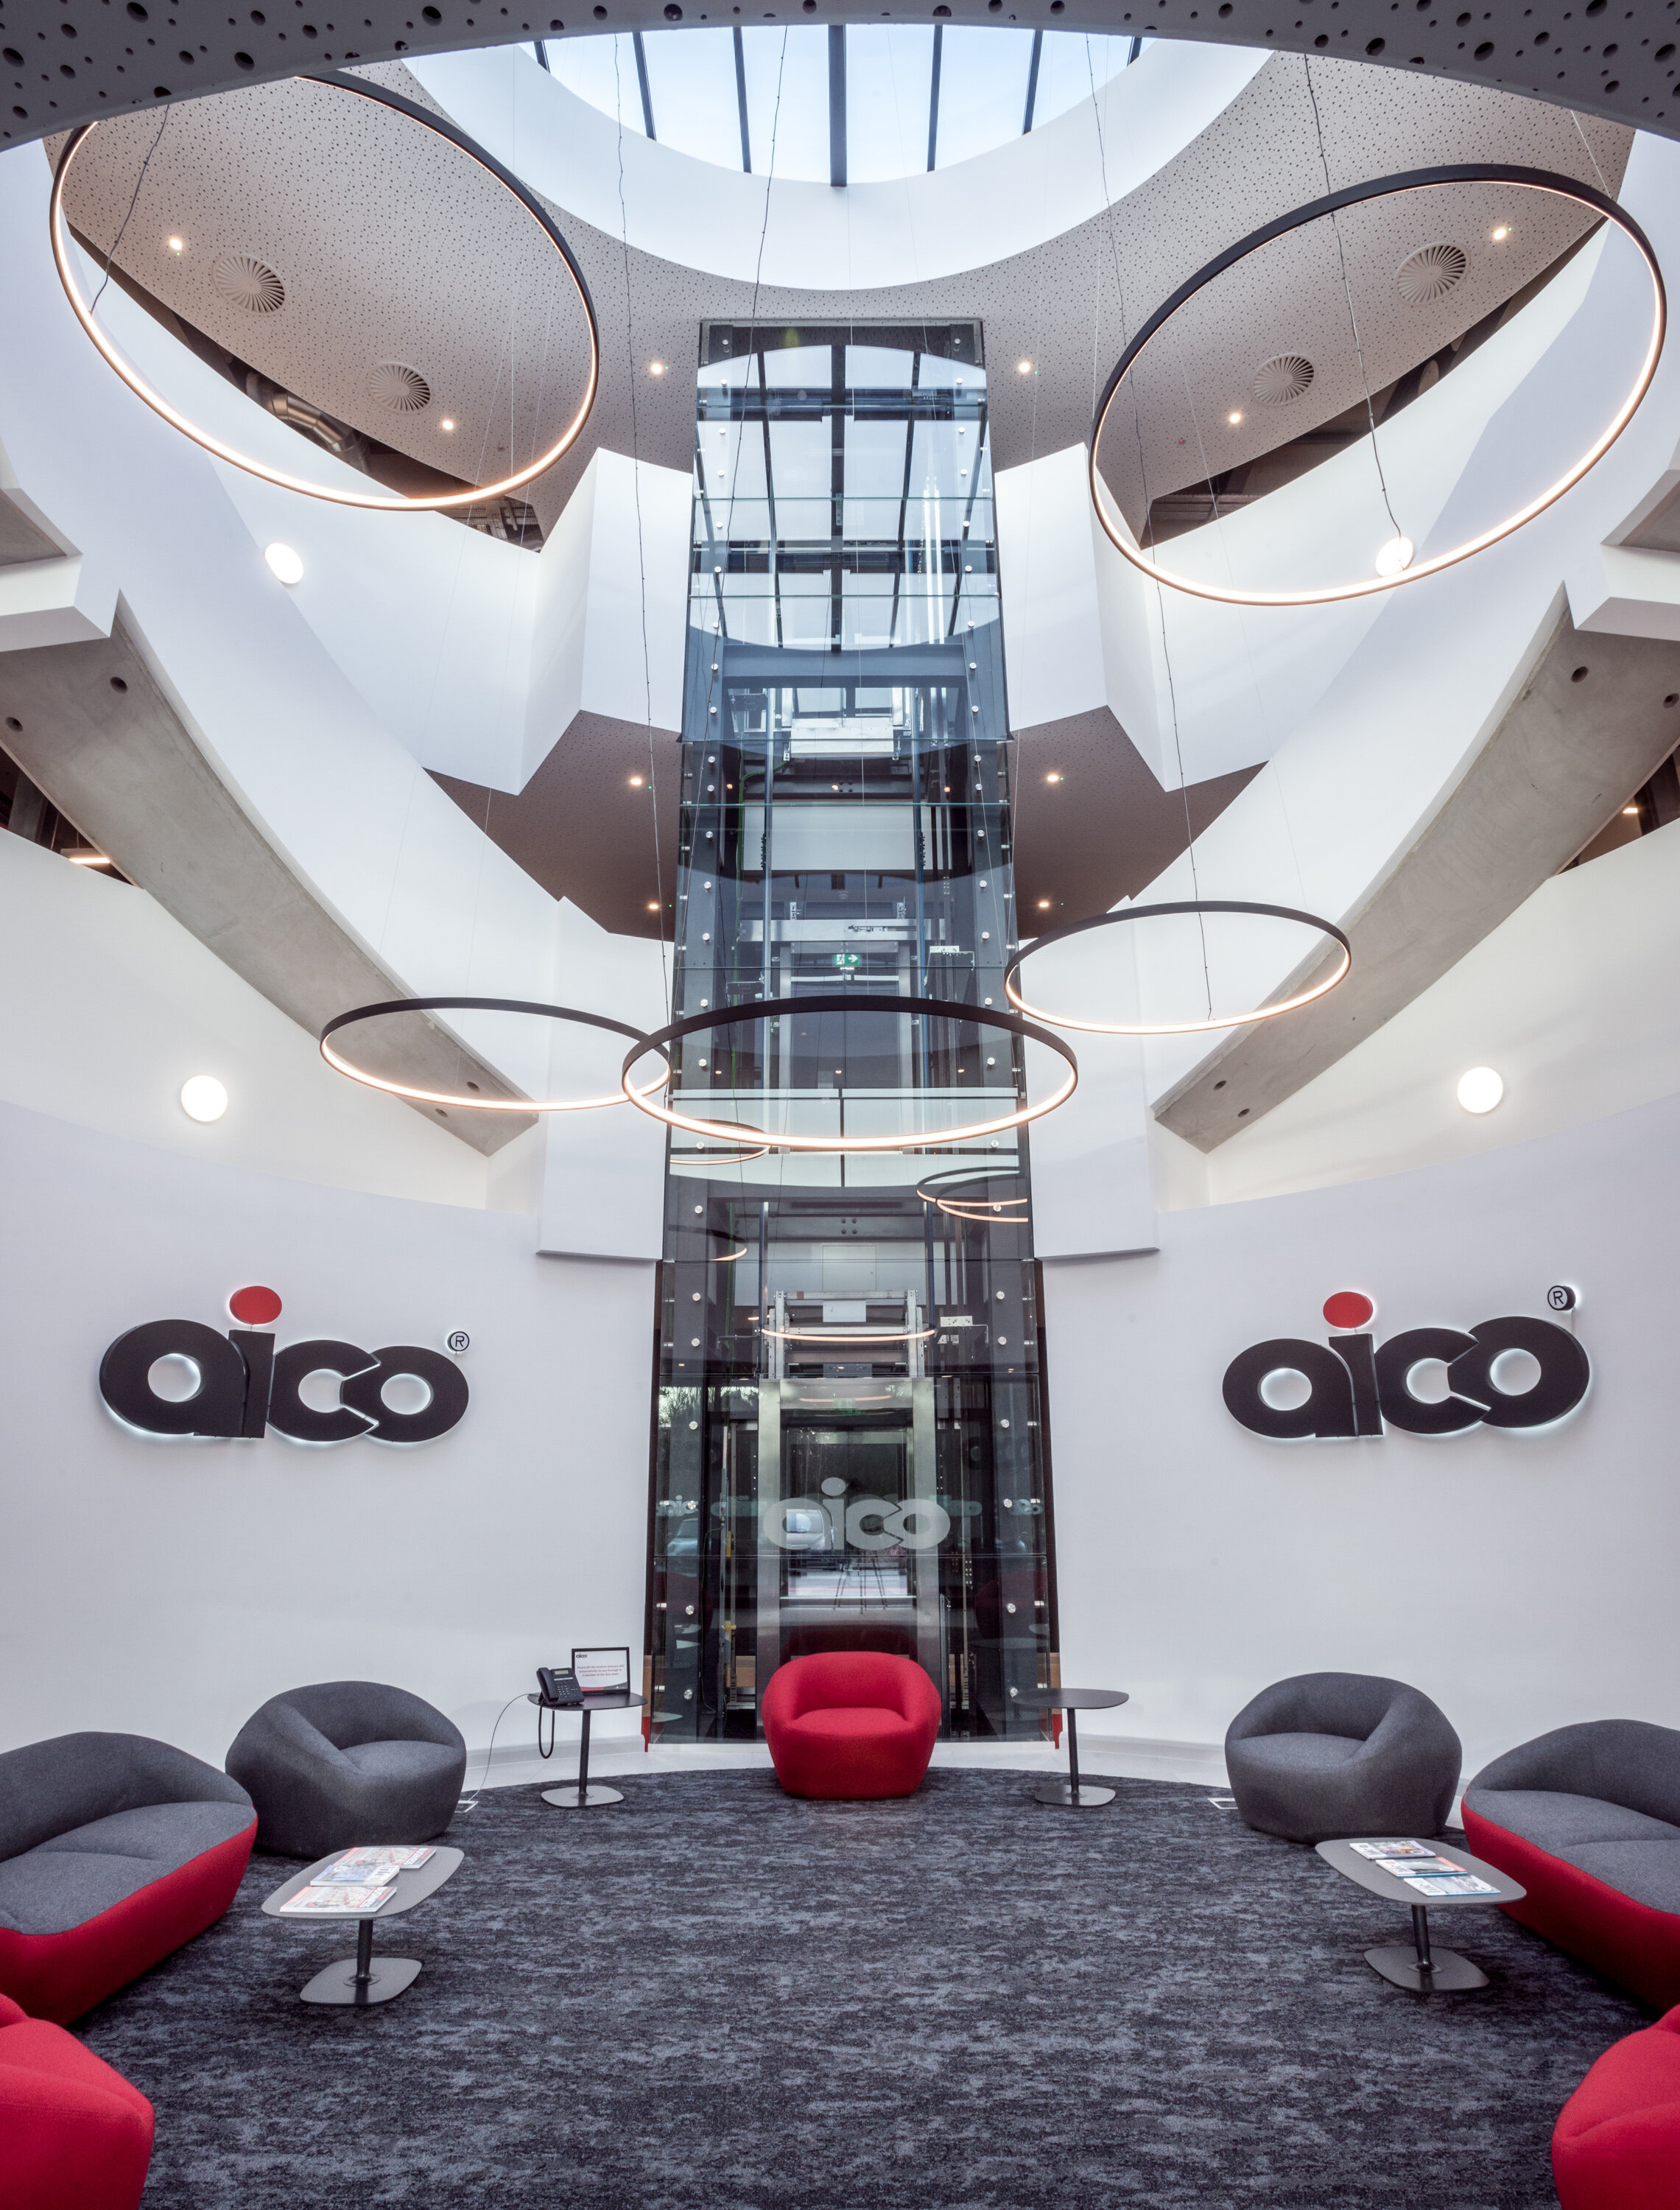  AICO Headquarters , Oswestry, Shropshire by DGA Architects, Shrewsbury, UK.Archictectural photographer Shropshire.Architectural and interior photographer head Quaters 